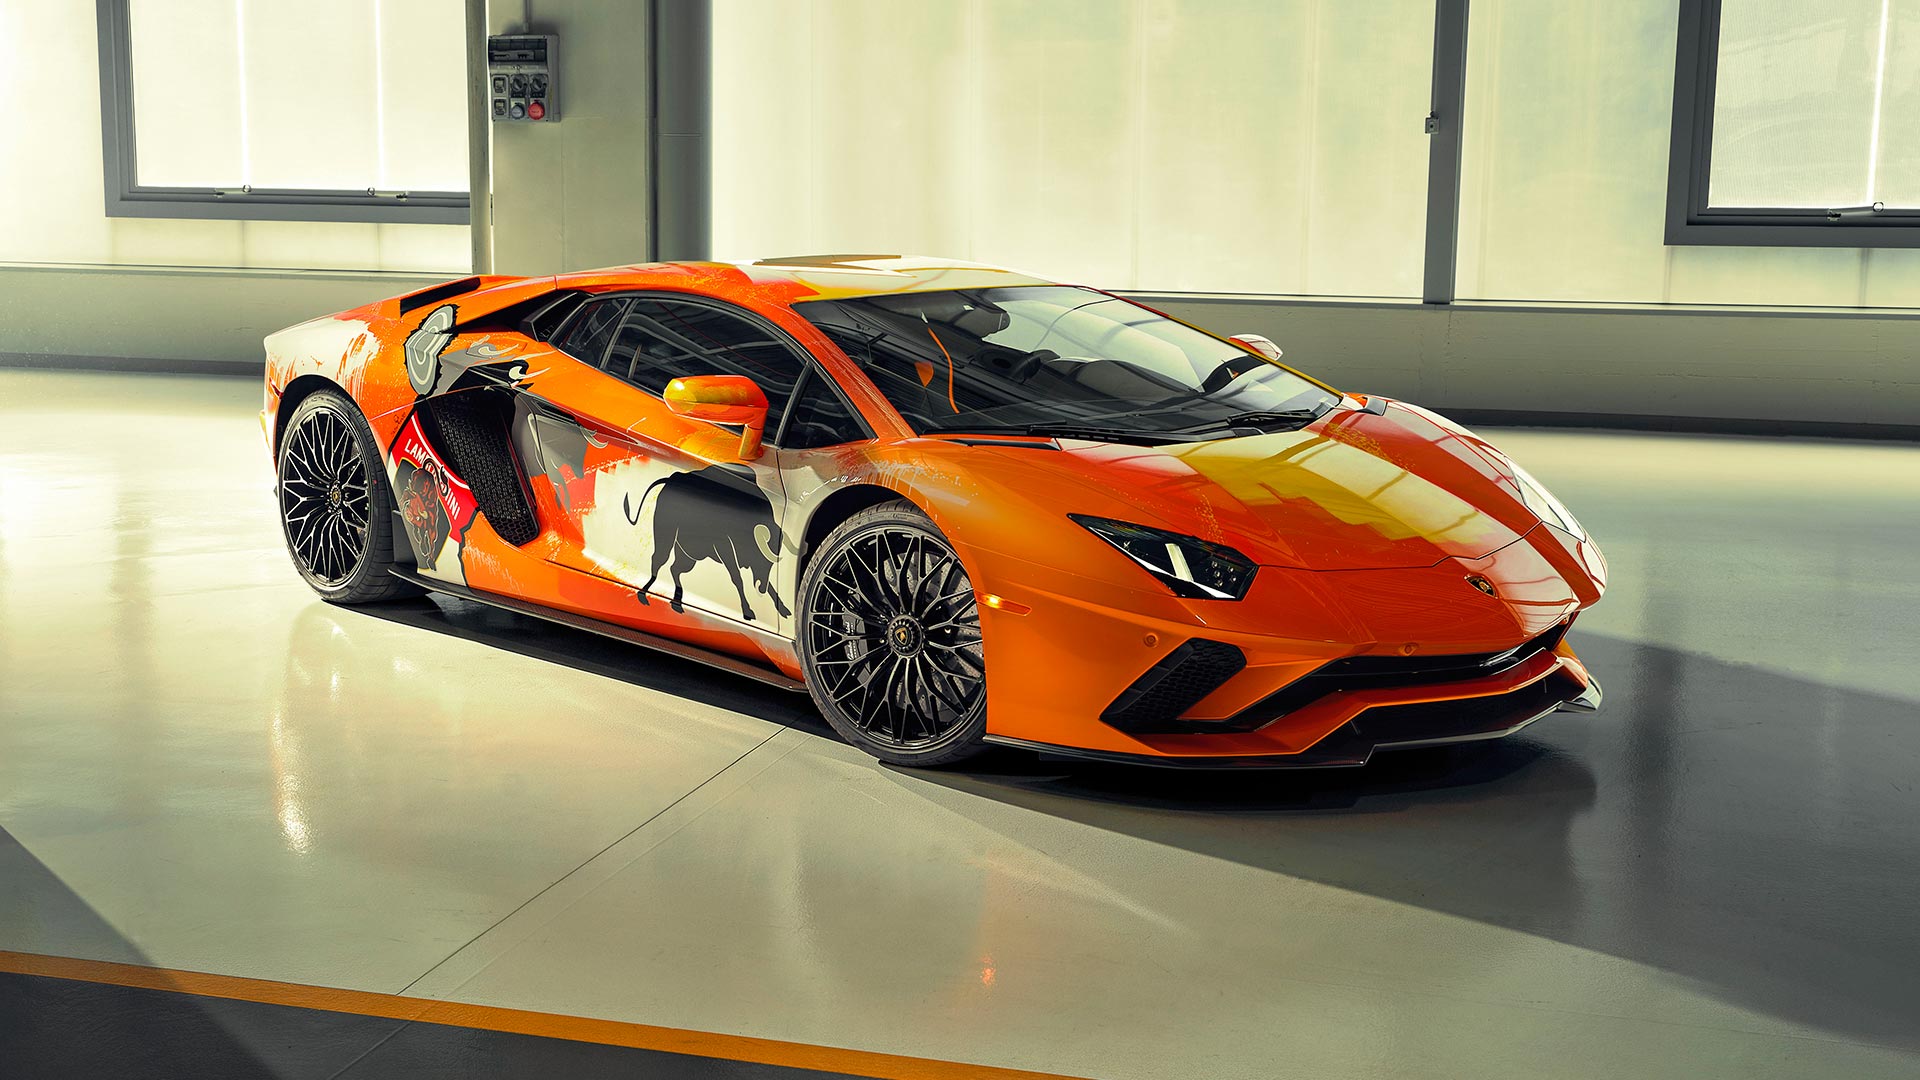 This Lamborghini has been turned into an incredible work of art - Motoring  Research